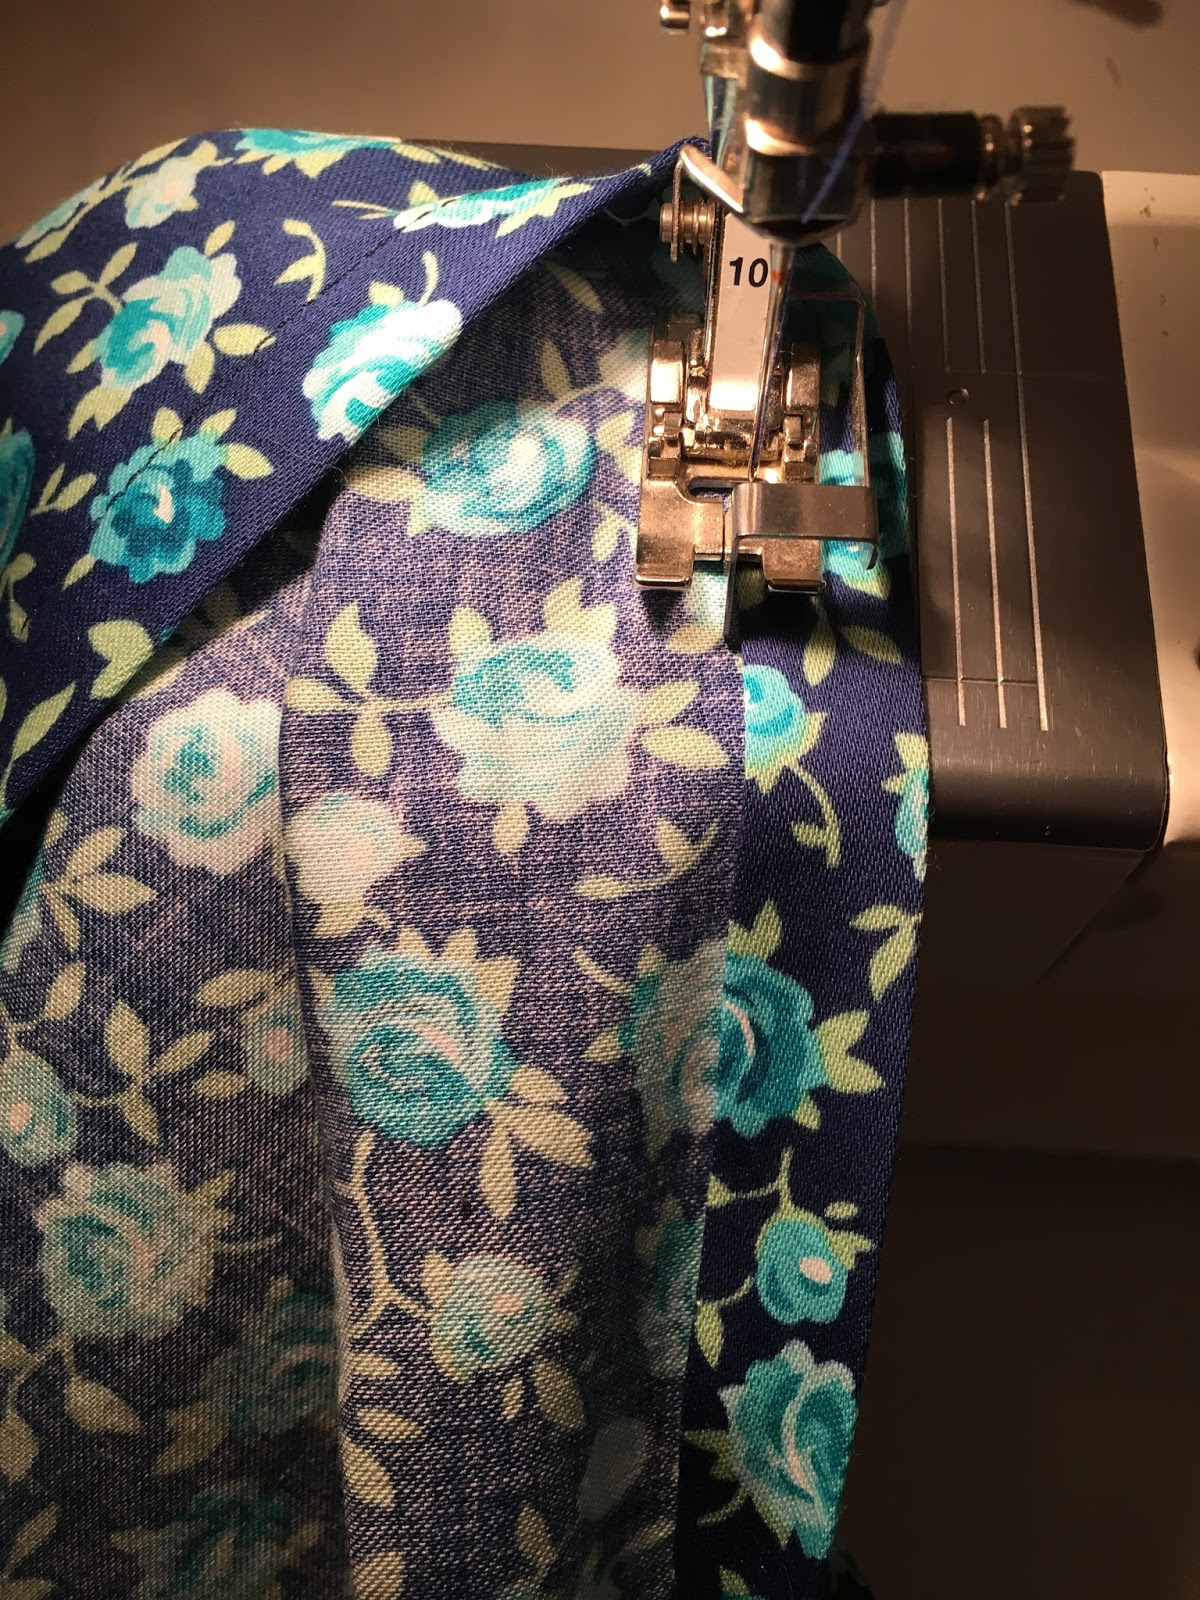 A Well Dressed Sewing Machine - Cover Tutorial